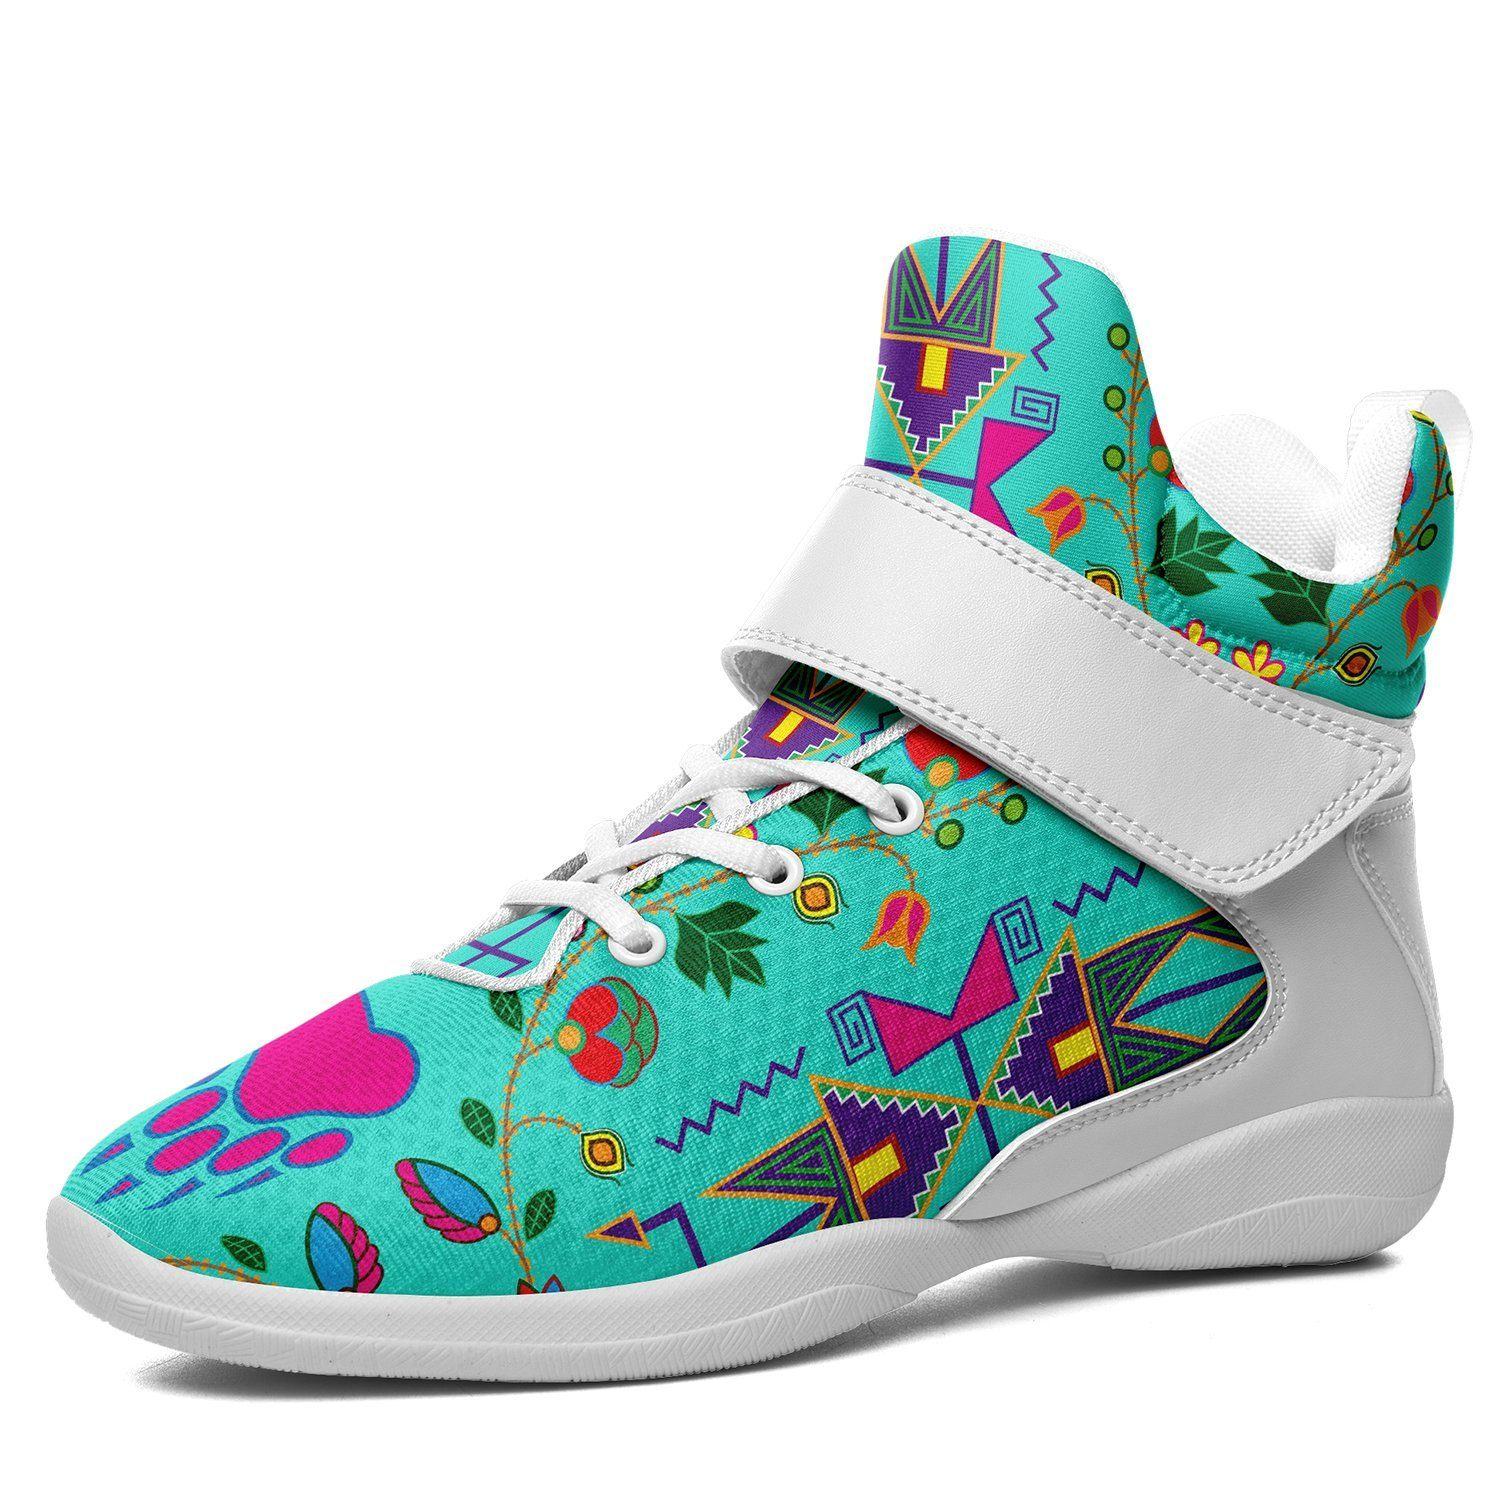 Geometric Floral Fall Sky Kid's Ipottaa Basketball / Sport High Top Shoes 49 Dzine US Women 4.5 / US Youth 3.5 / EUR 35 White Sole with White Strap 